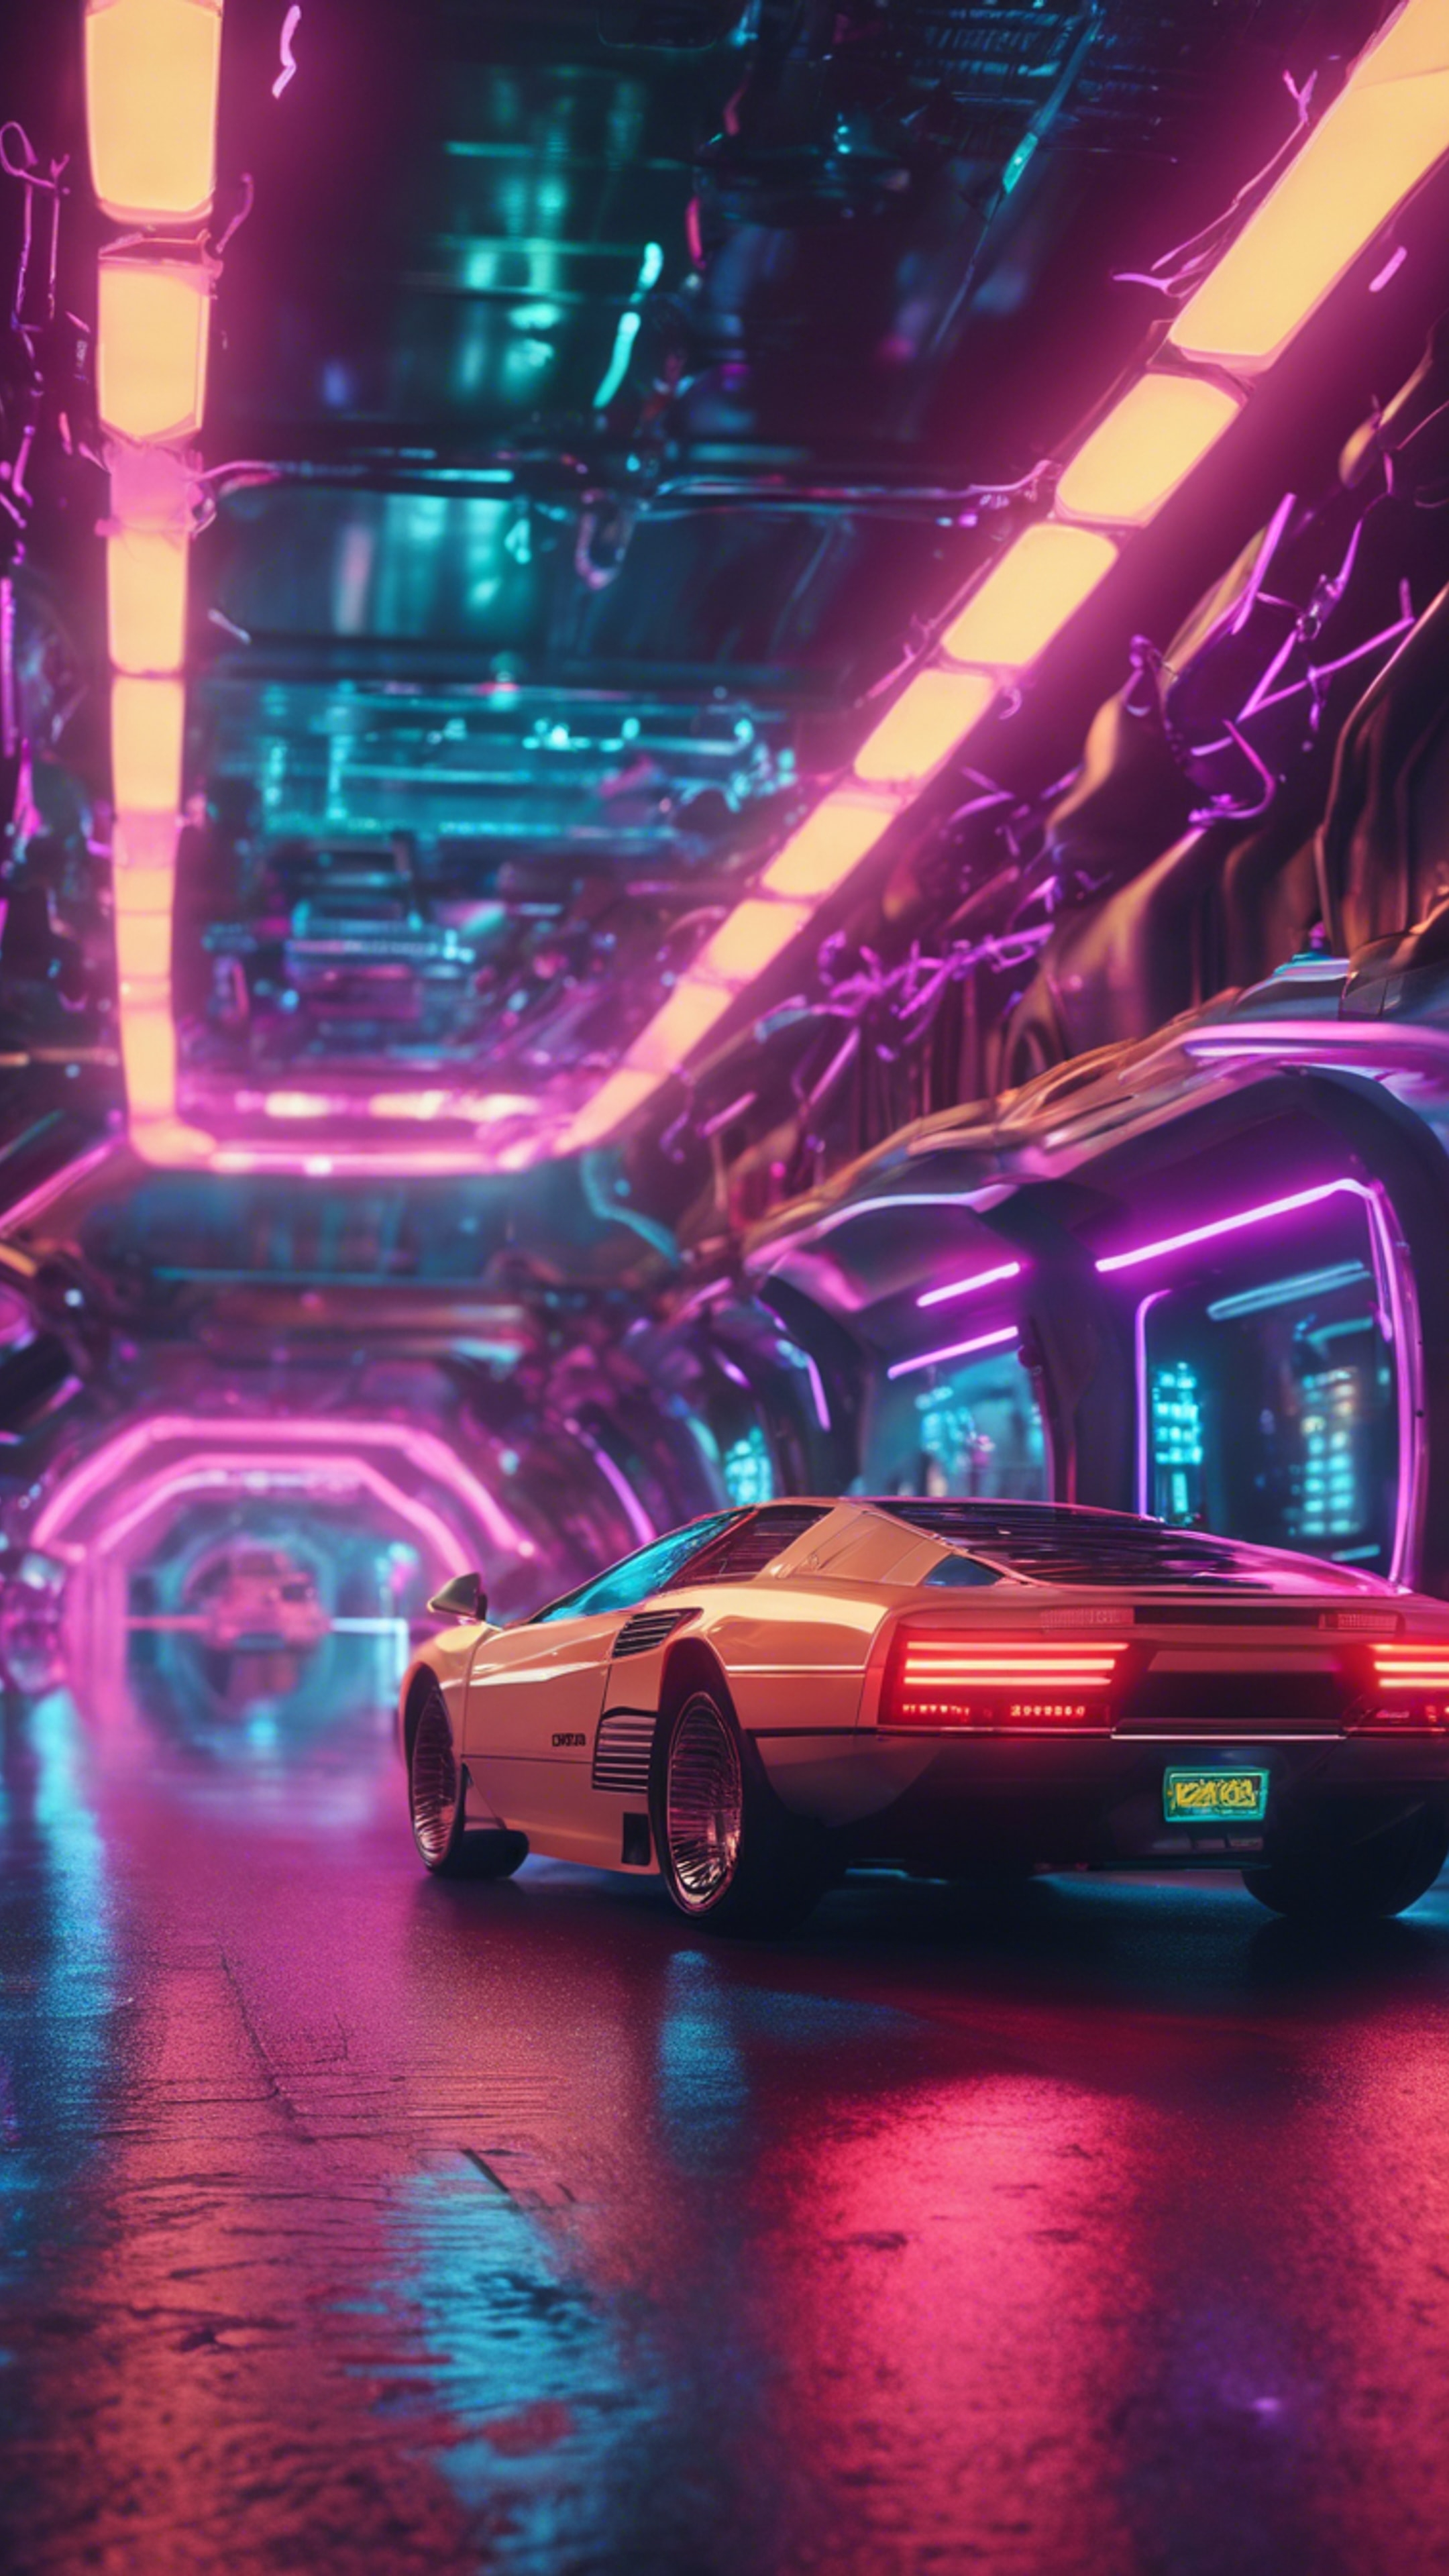 A Cyber-Y2K style chase scene with hover cars speeding through neon-lit tunnels.壁紙[a7b24e631c154bdda129]